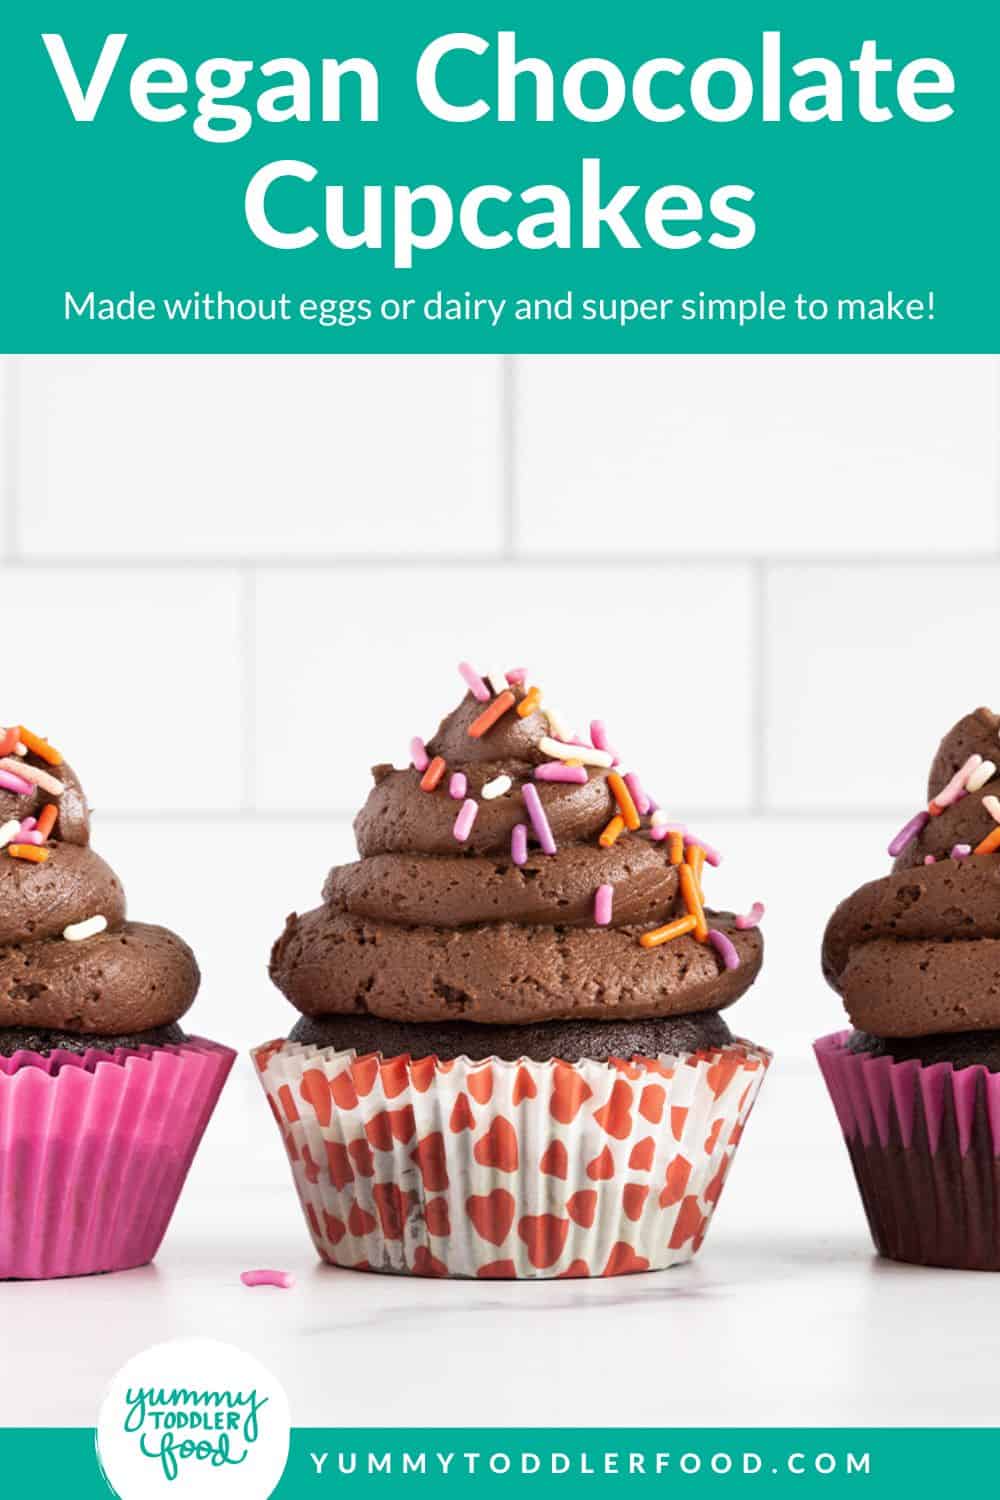 how to make vegan chocolate cupcakes in grid of 4 images.